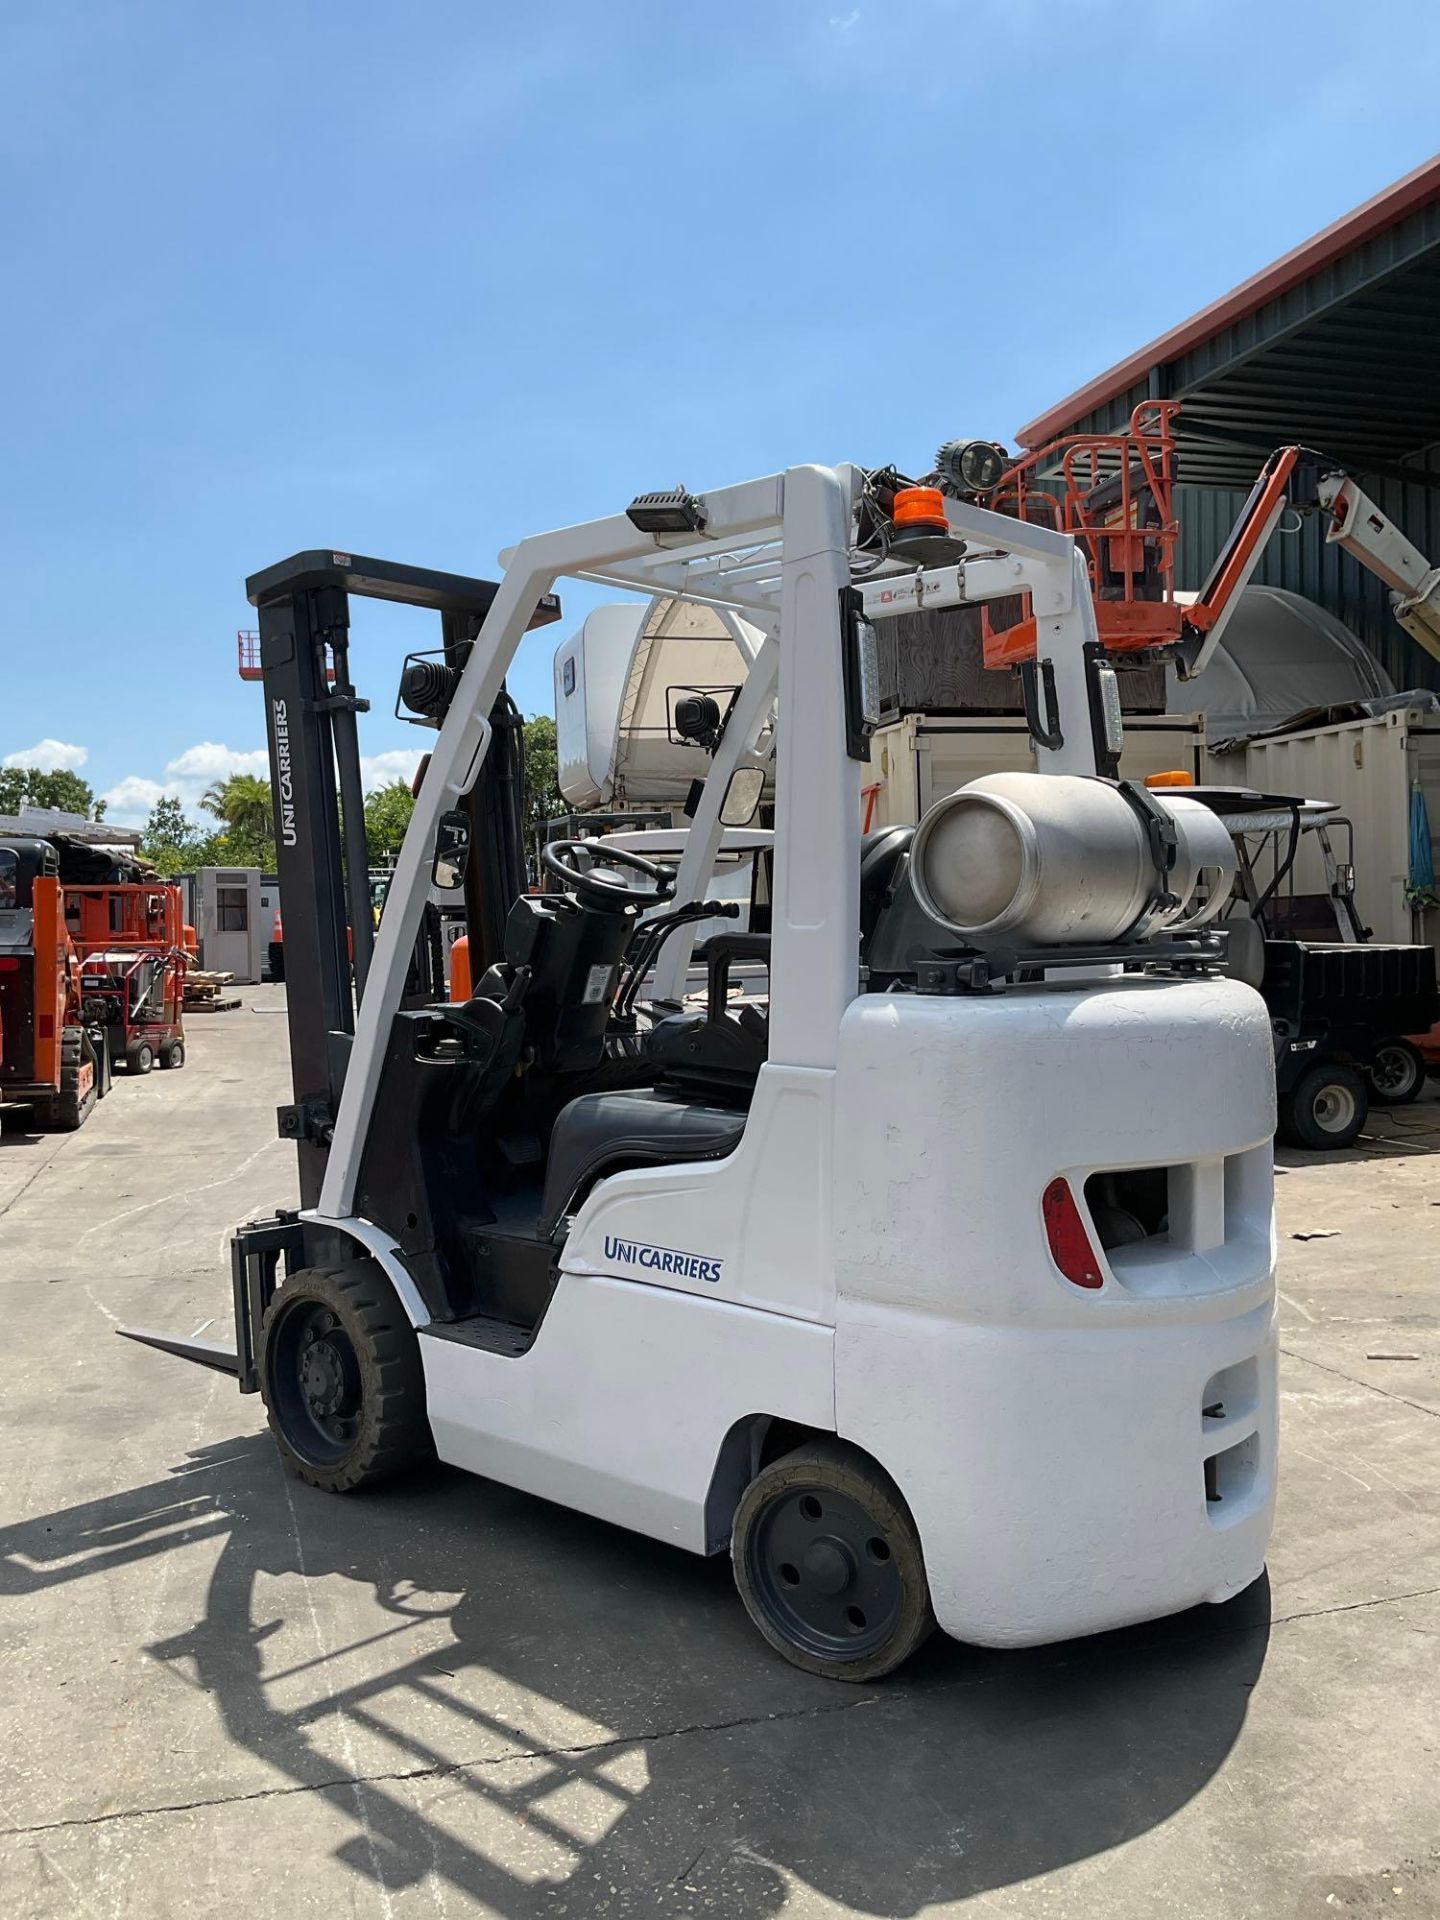 2018 UNICARRIERS FORKLIFT MODEL MCP1F2A28LV, LP POWERED - Image 3 of 12